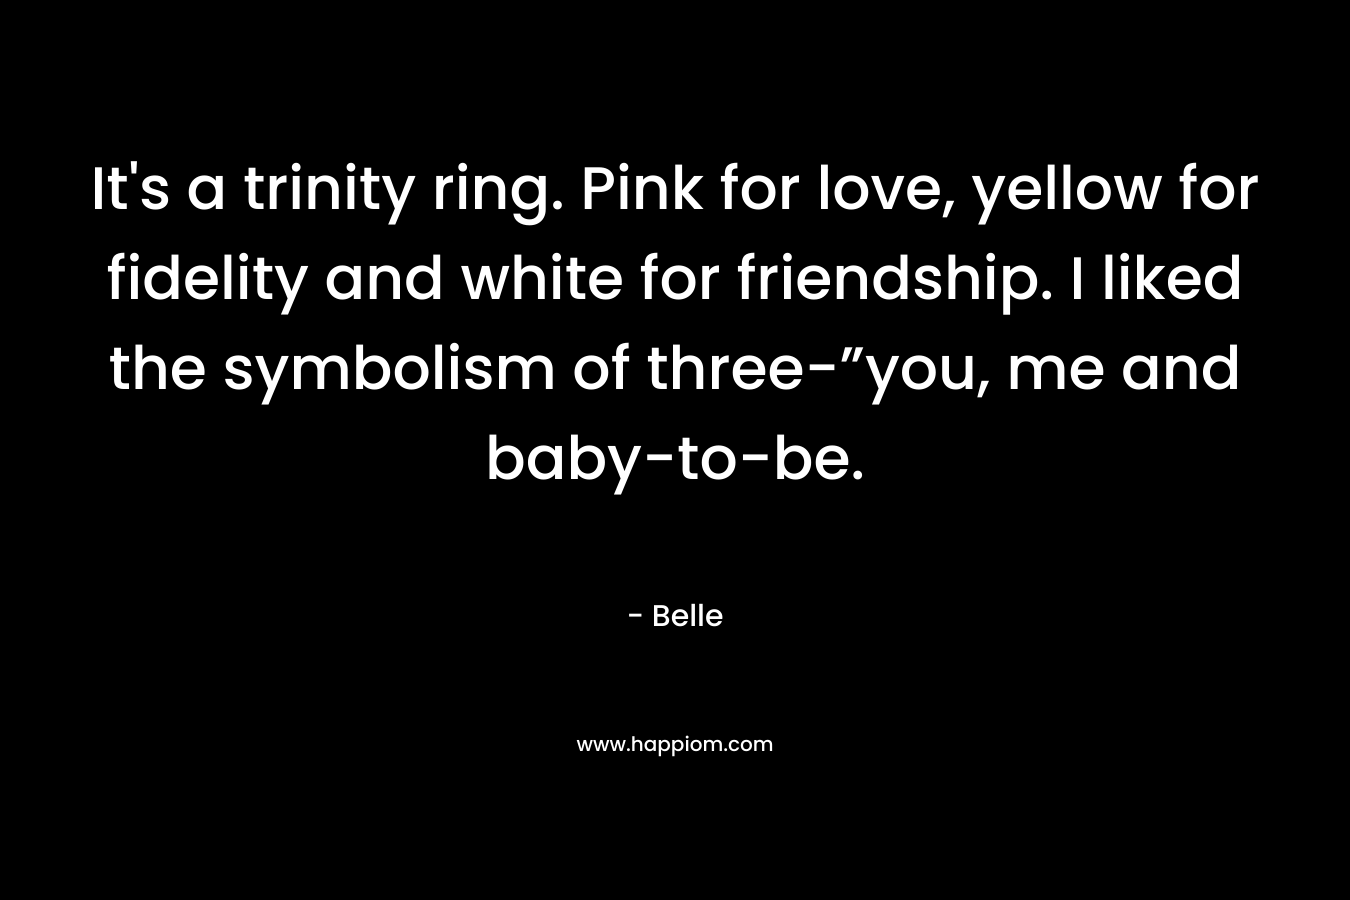 It’s a trinity ring. Pink for love, yellow for fidelity and white for friendship. I liked the symbolism of three-”you, me and baby-to-be. – Belle